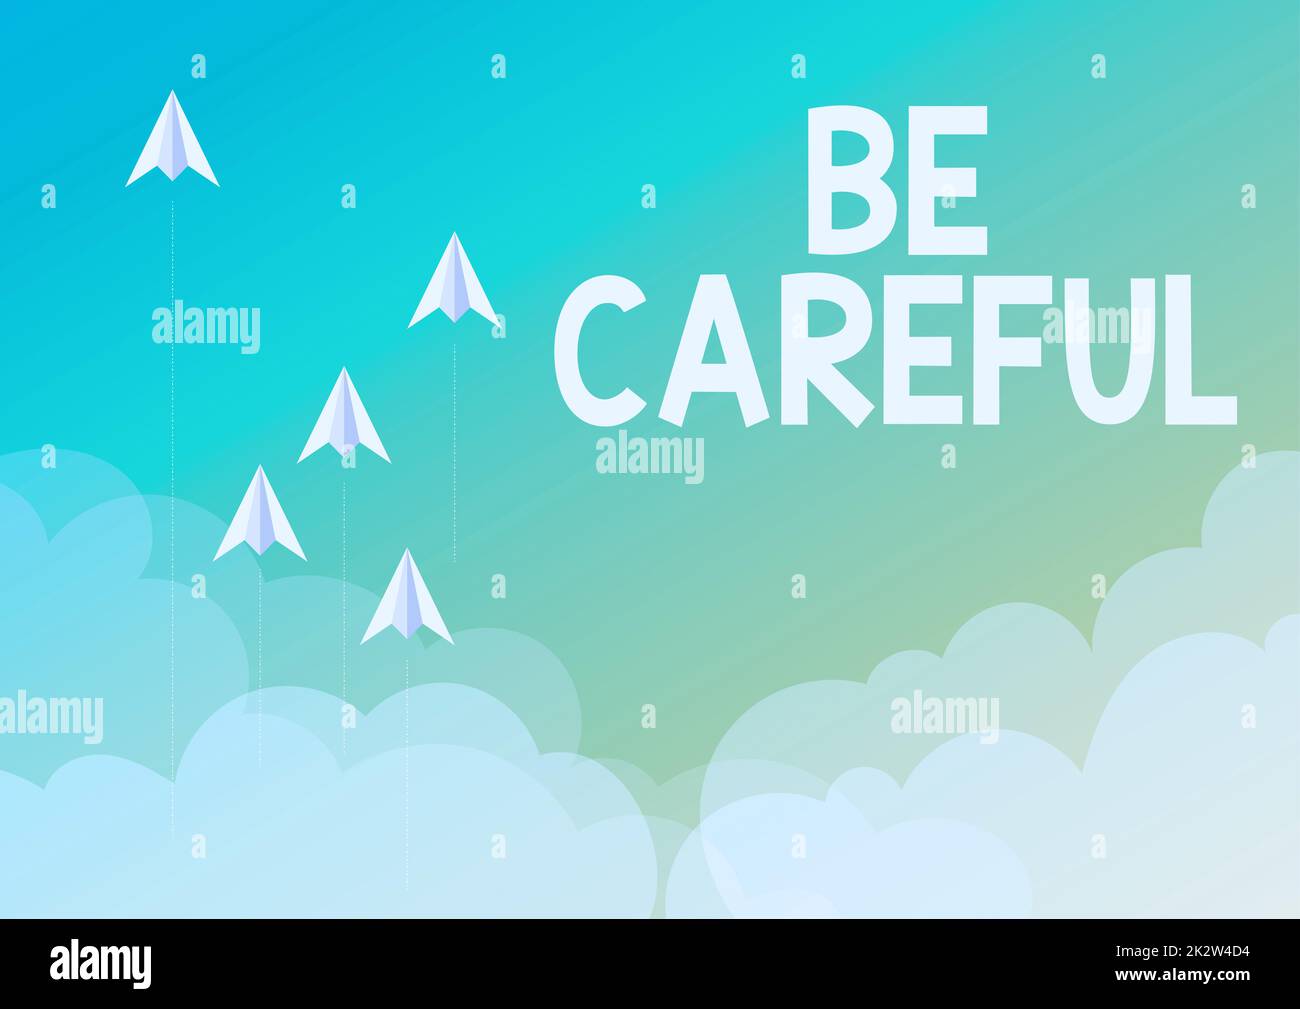 Text caption presenting Be Careful. Word for making sure of avoiding potential danger mishap or harm Five paper airplanes flying up sky surrounded with clouds achieving goals. Stock Photo